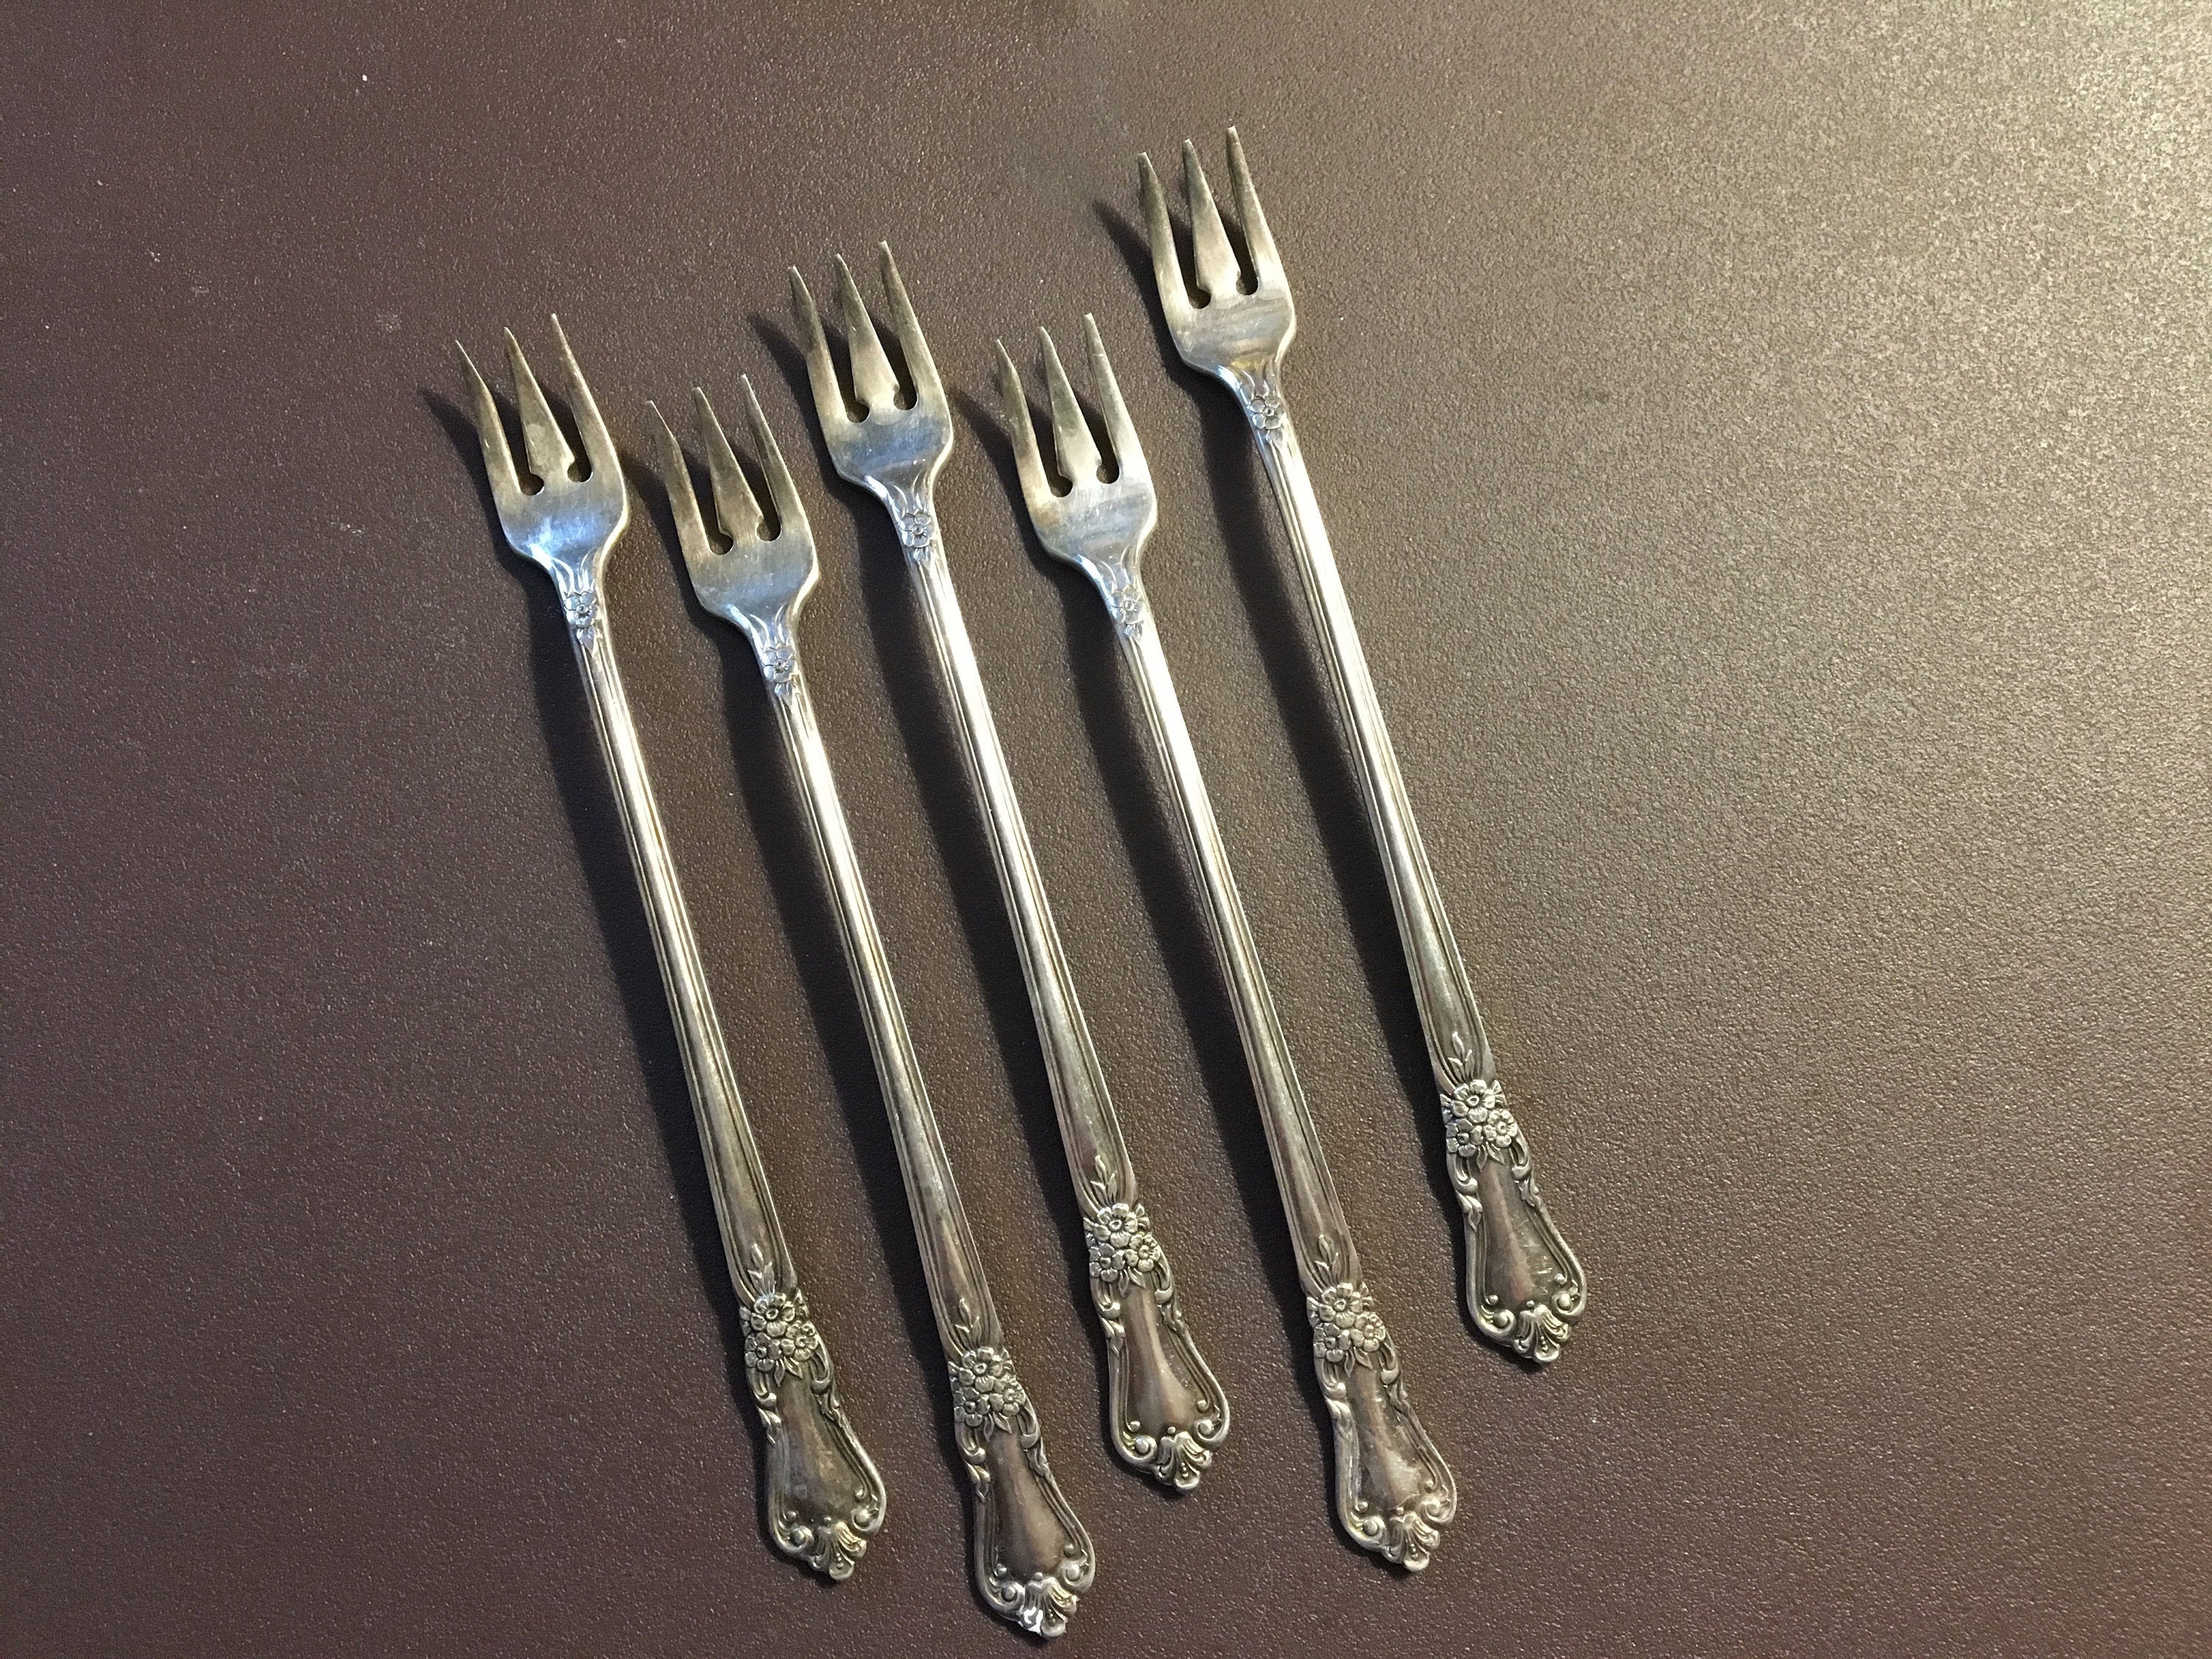 1956 Wm. A. Rogers | Now Oneida Valley Rose Silver-Plate Cocktail Forks Or Seafood | Set Of 5